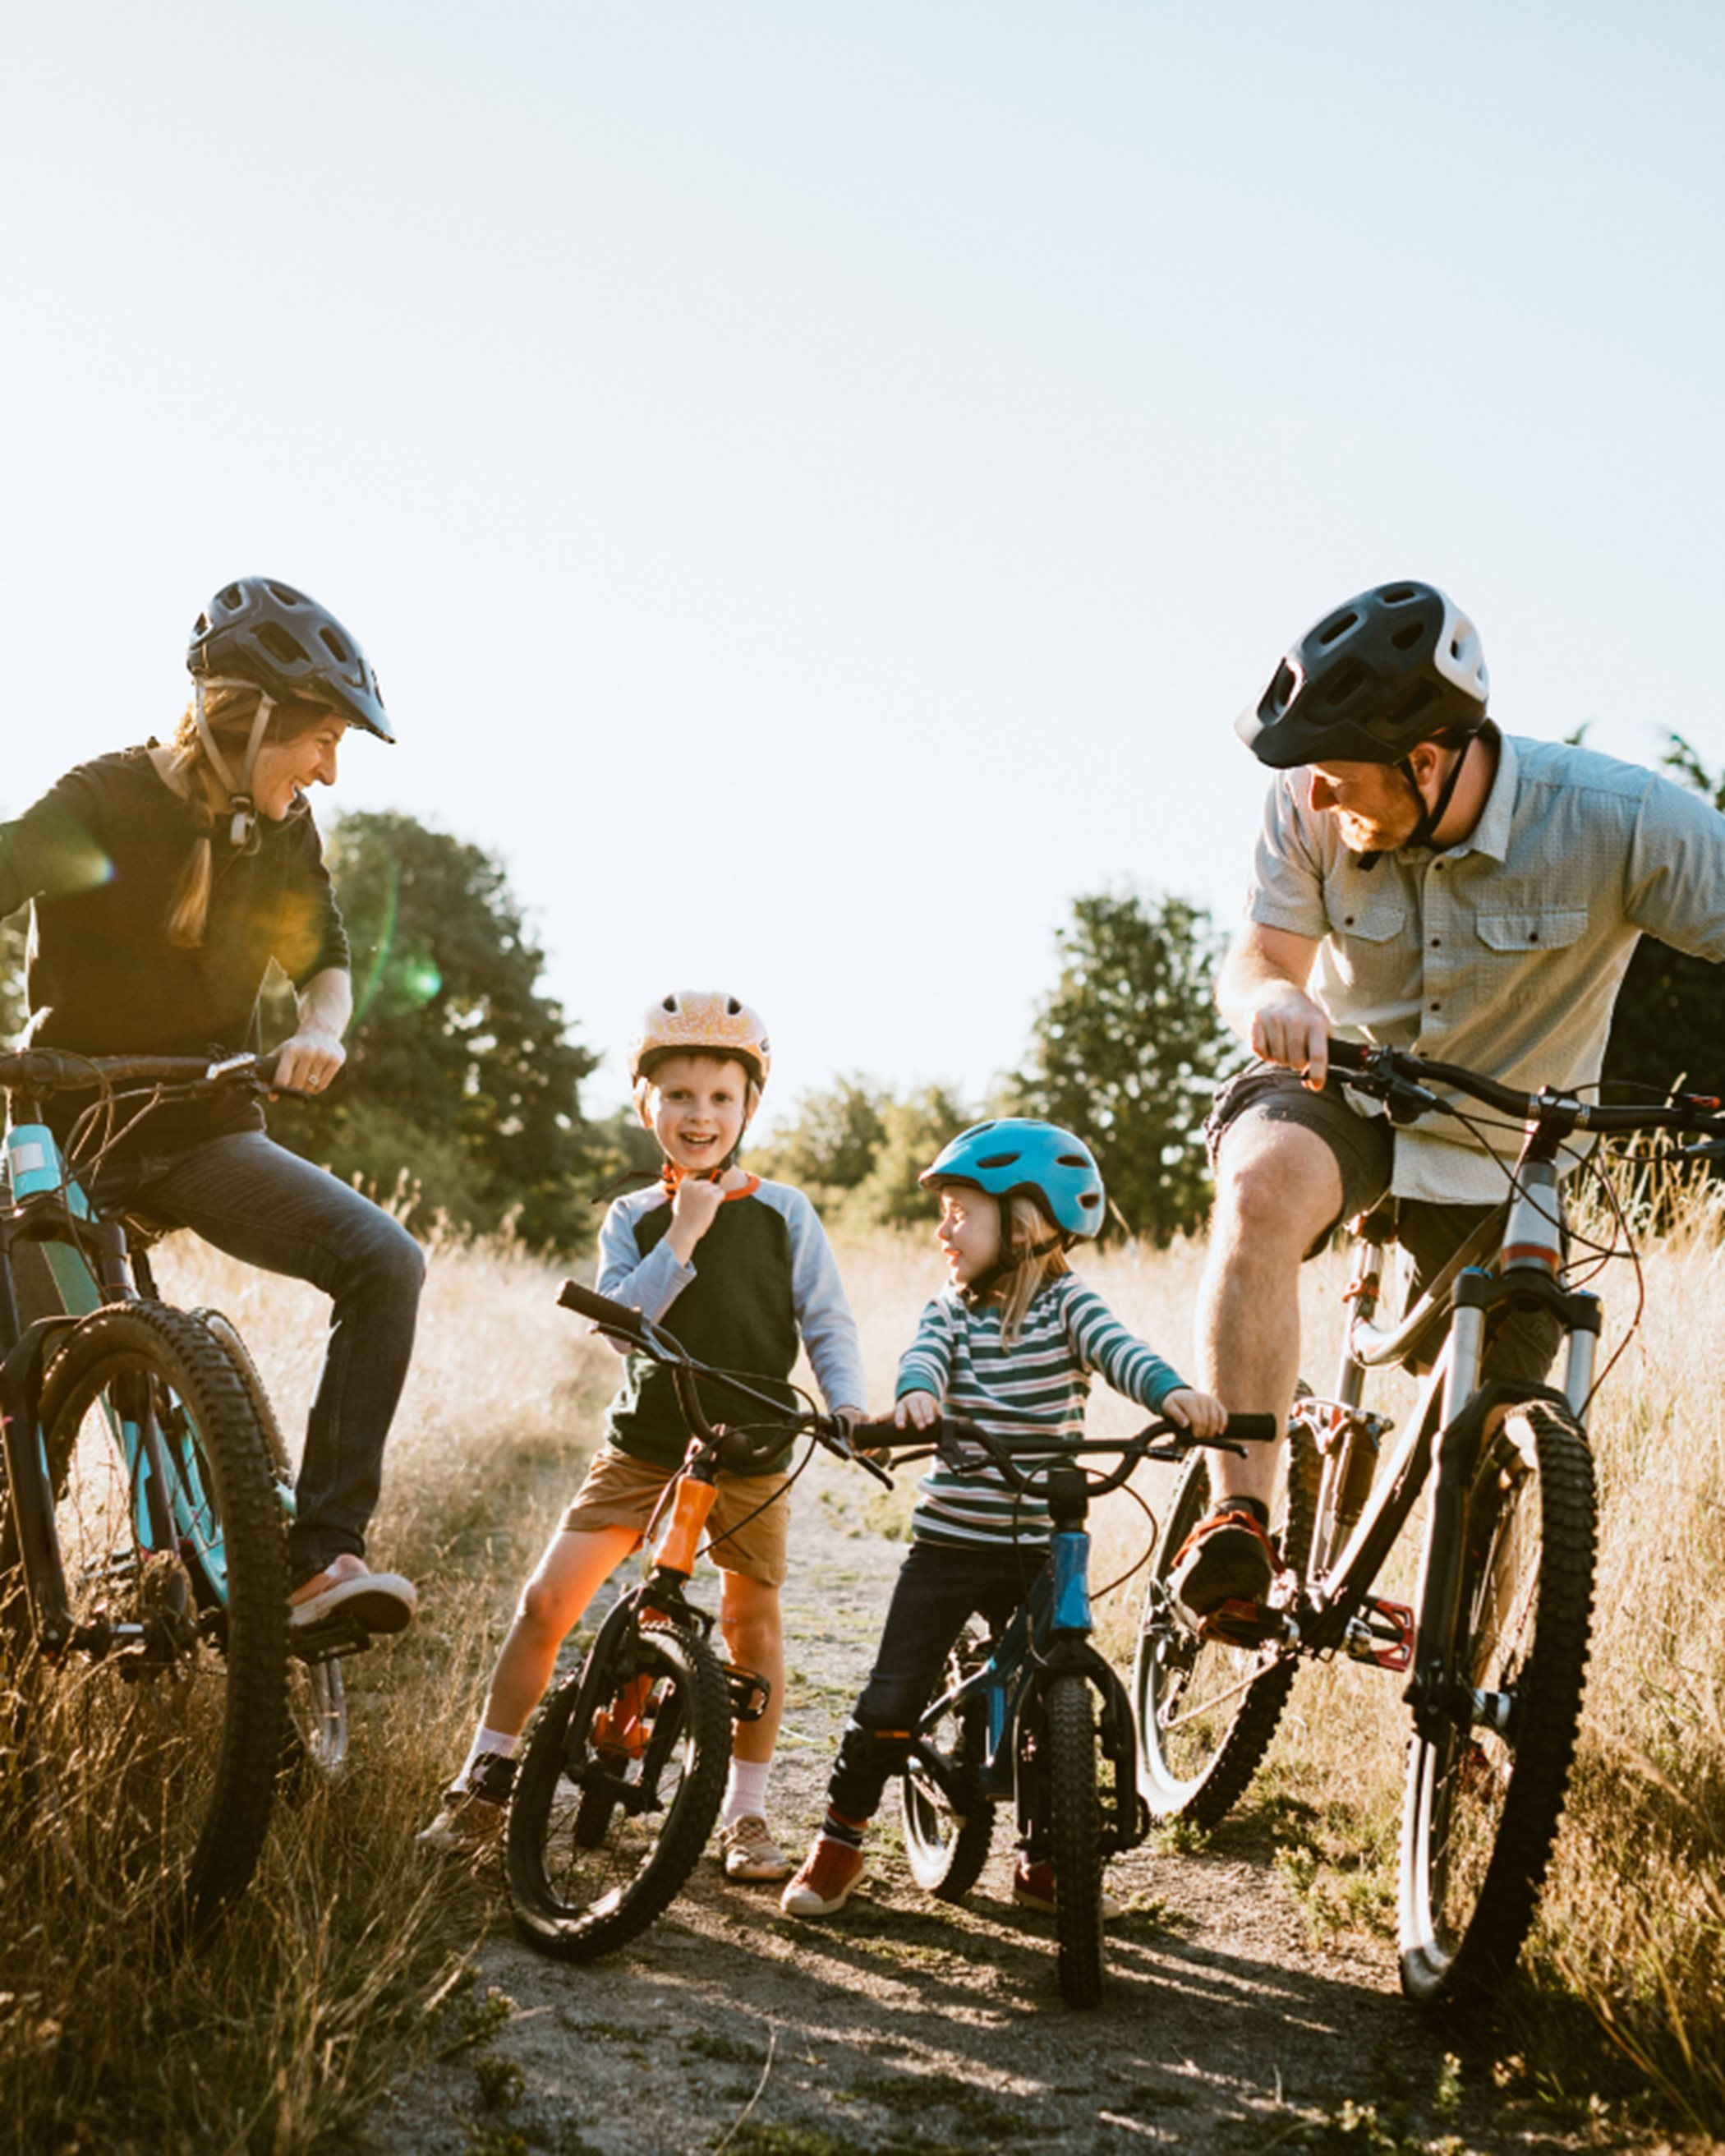 A family biking together on a trail